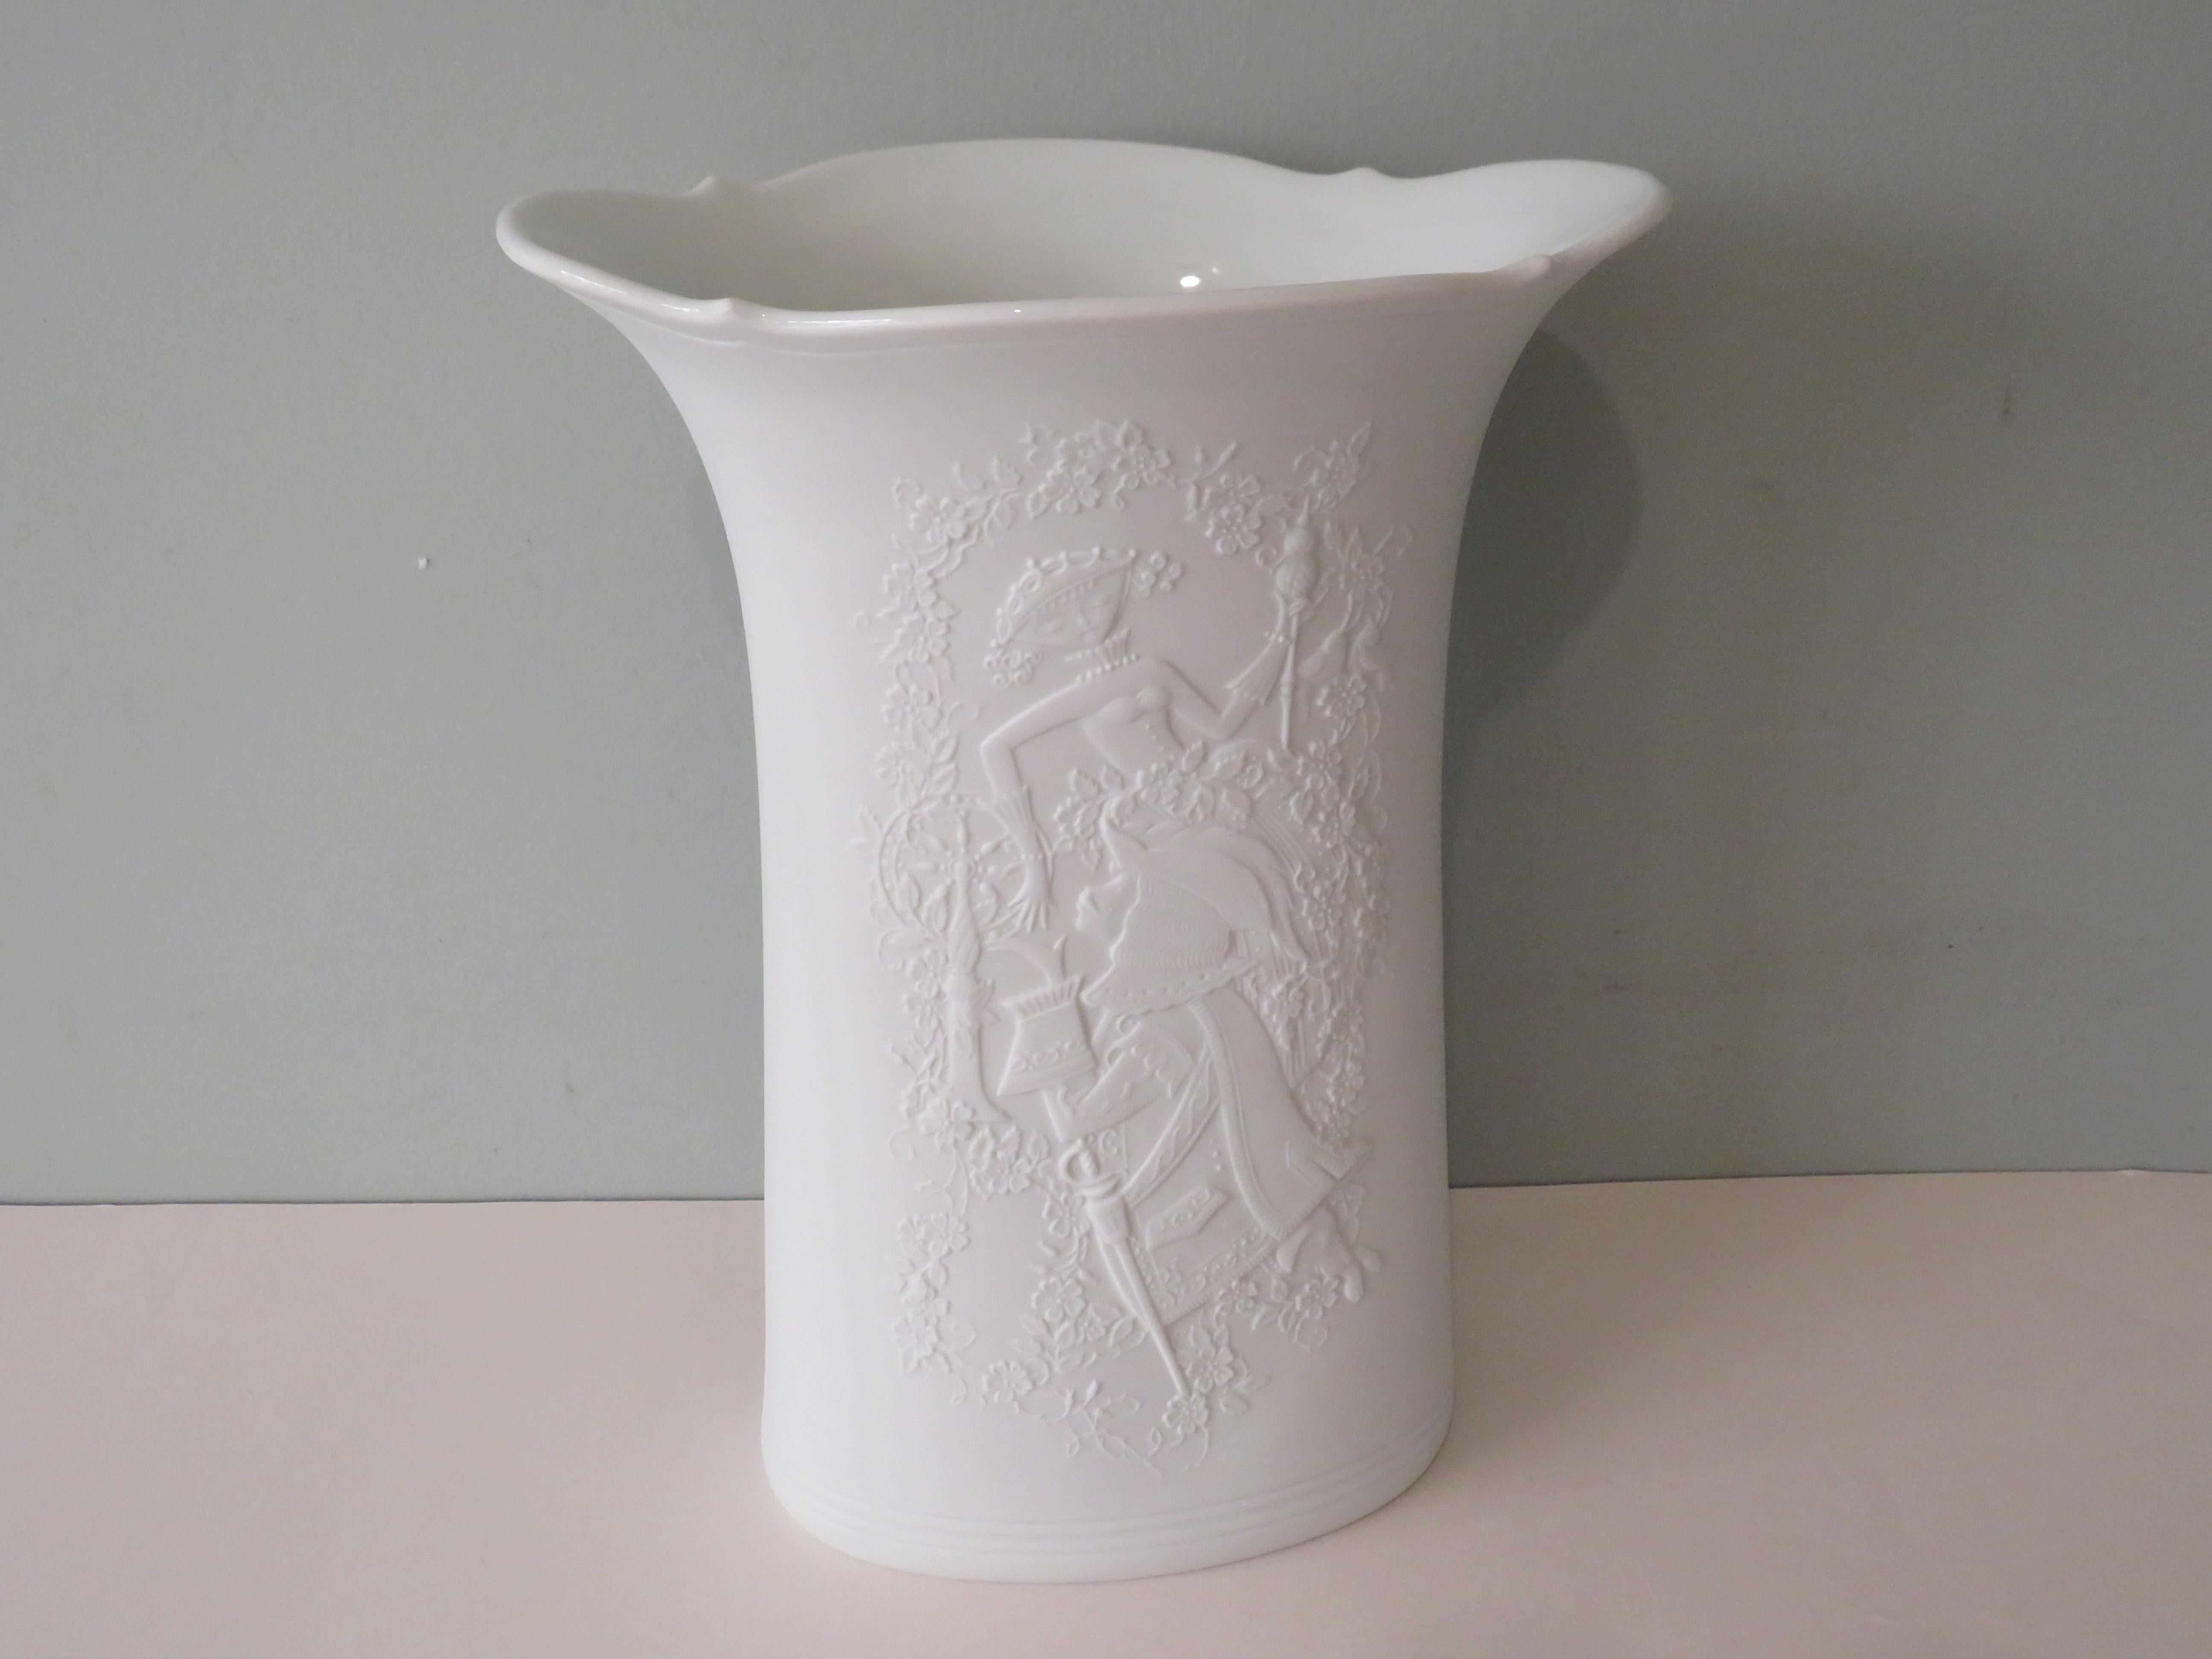 High, tapering oval vase with a curved edge and on both sides a very detailed embossed royal romantic motif of a lady and lord of the court with a background of flowers.
The vase has a matte white exterior and a glossy white interior.
The vase is